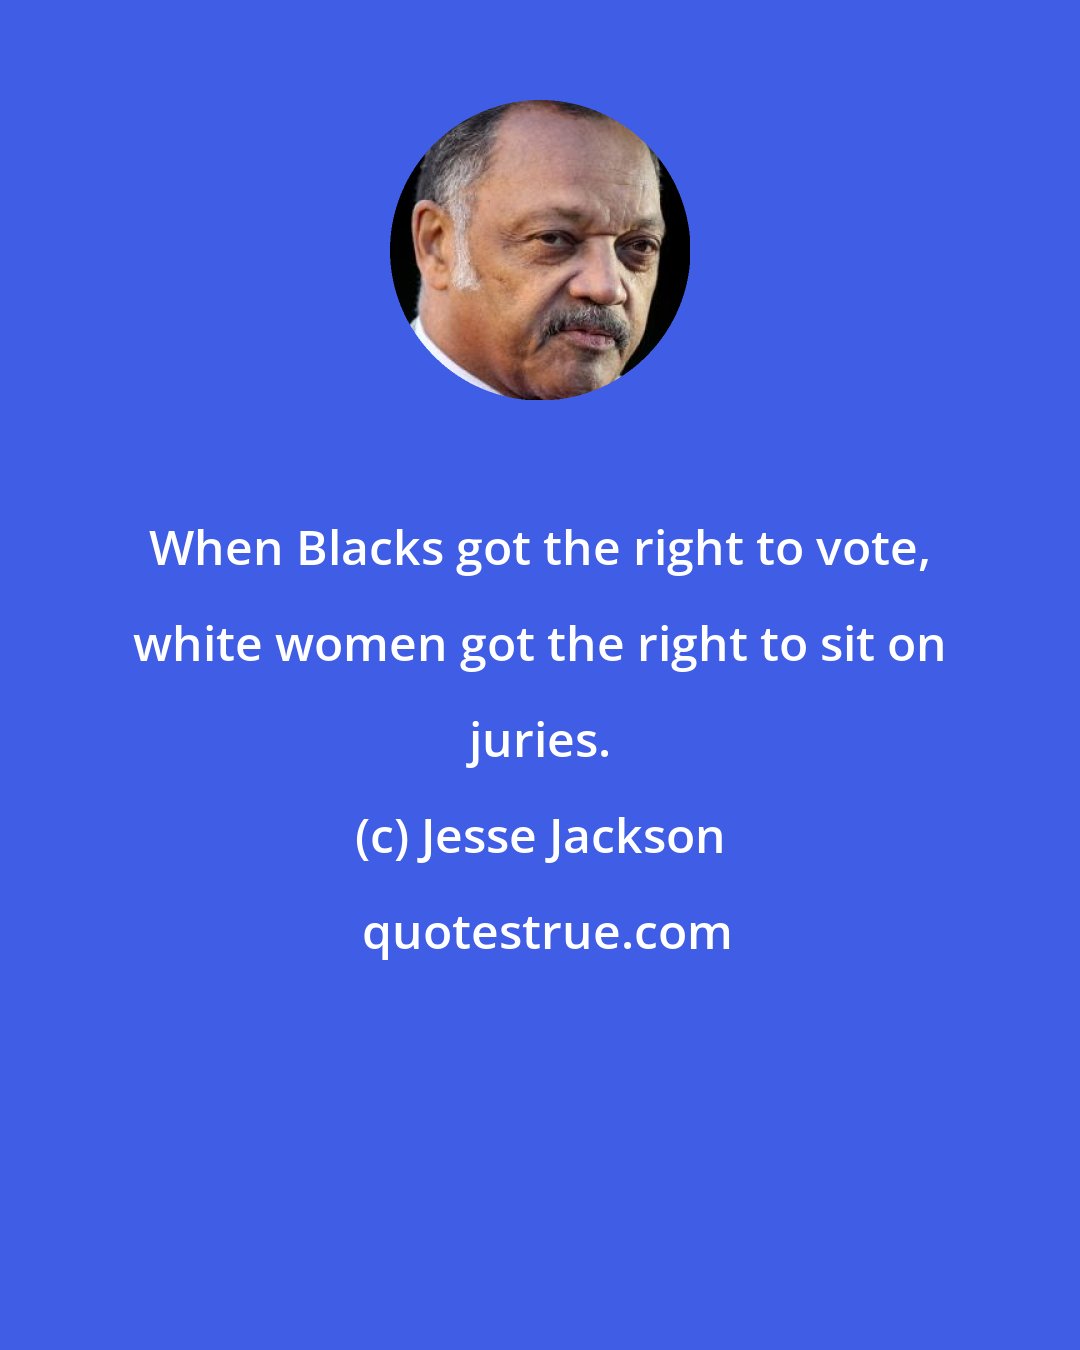 Jesse Jackson: When Blacks got the right to vote, white women got the right to sit on juries.